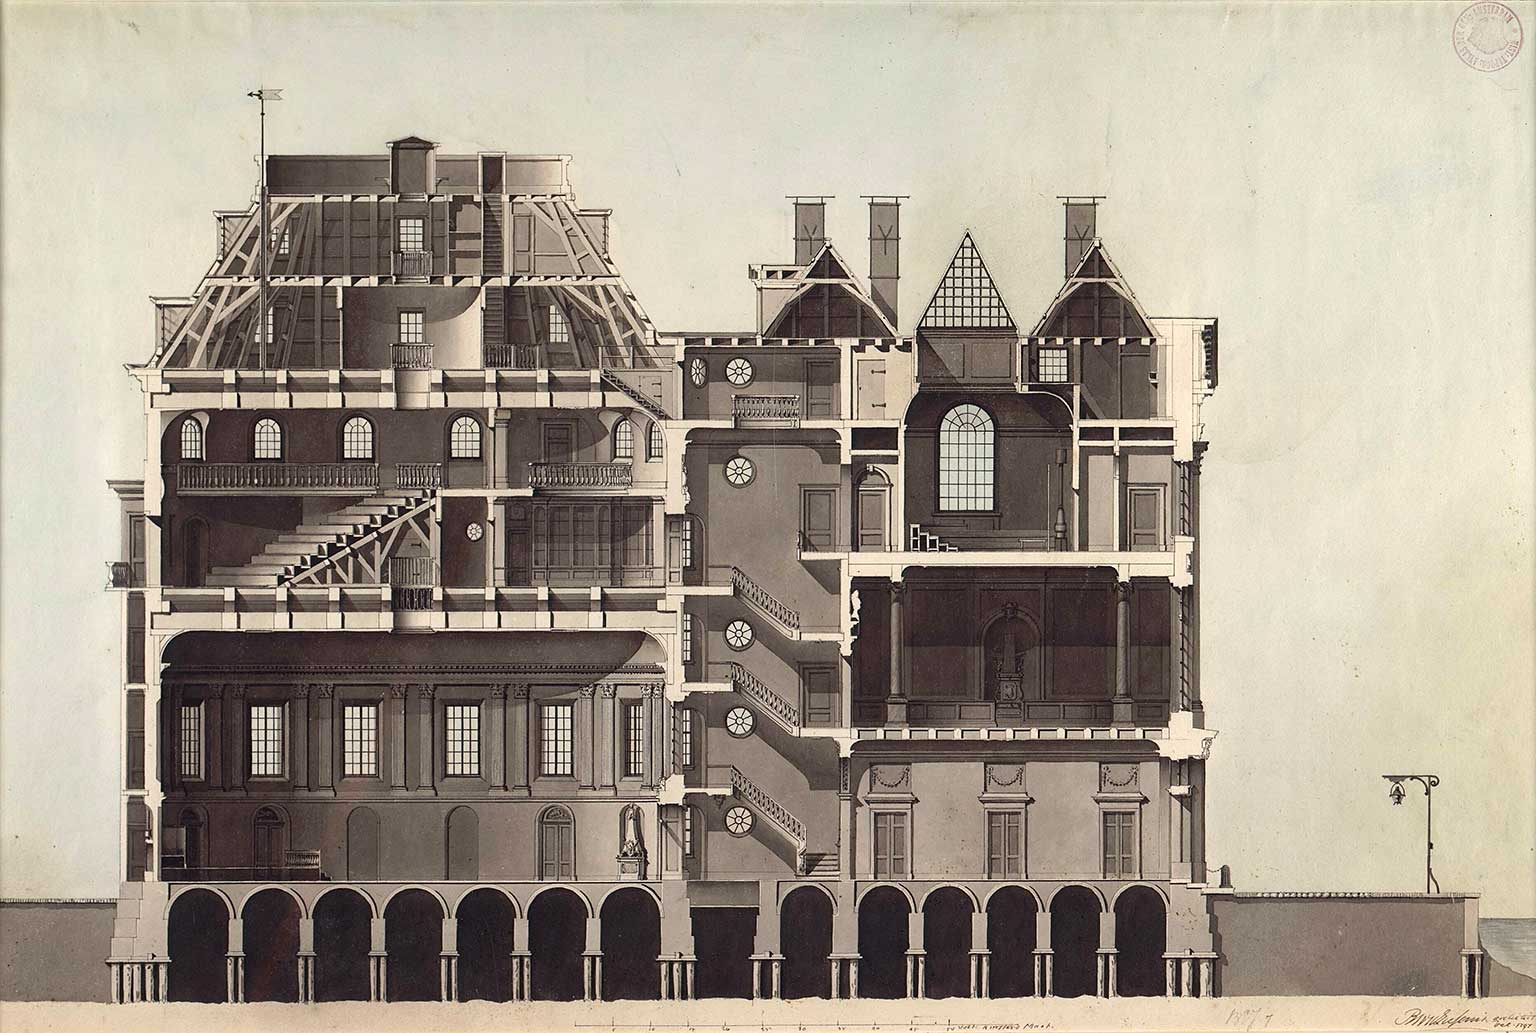 Side view cross section of Felix Meritis, Amsterdam, drawing from around 1790 